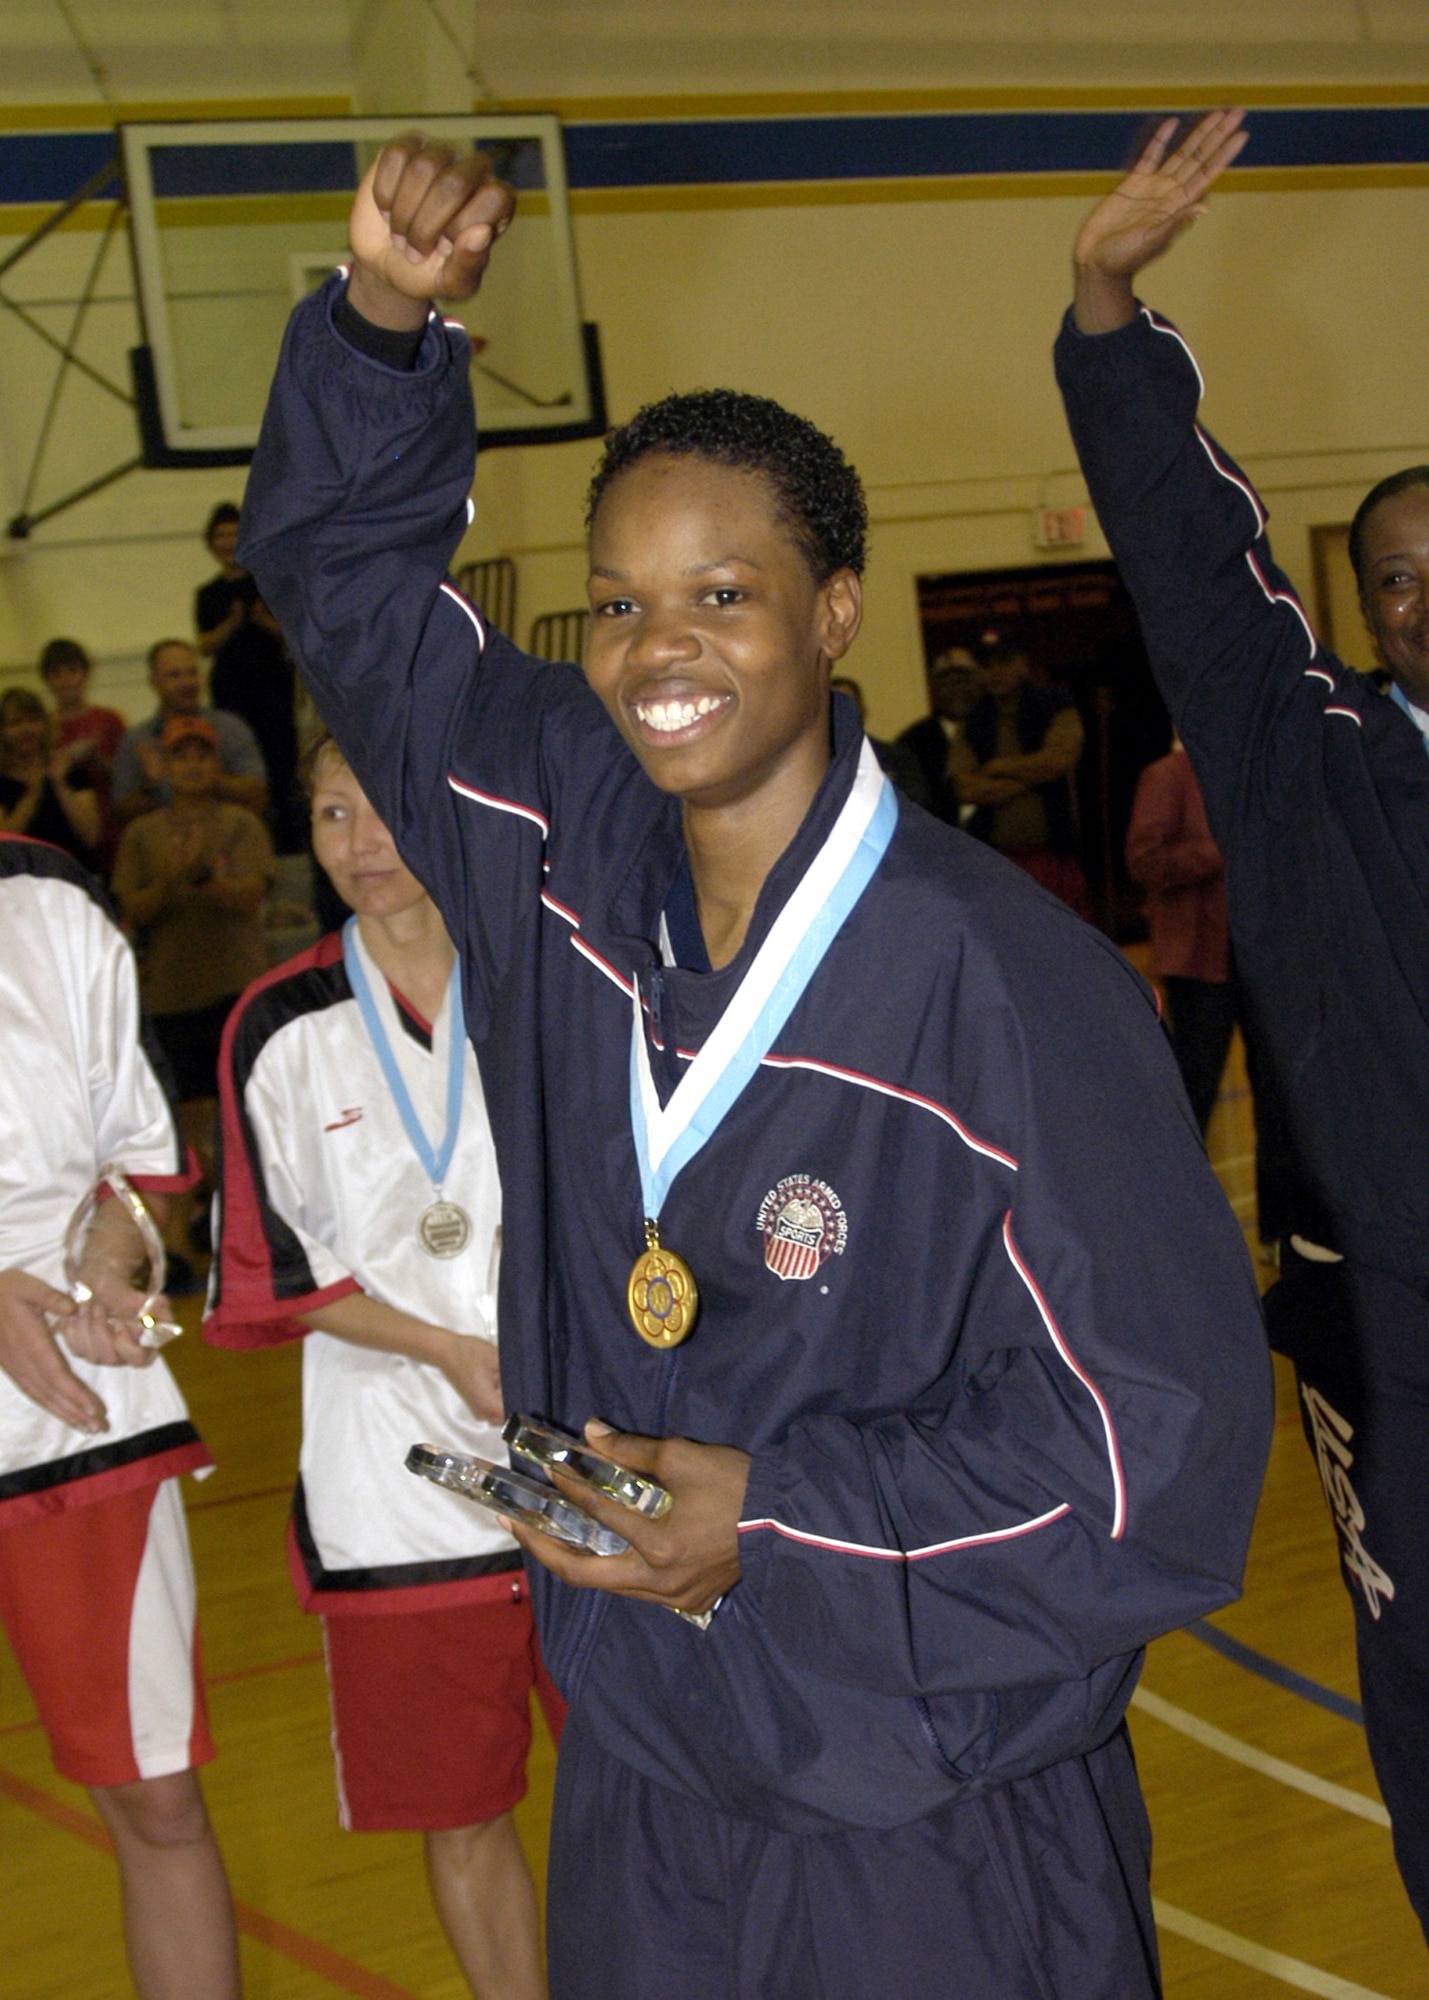 NAVAL BASE VENTURA COUNTY, Calif. -- Airman 1st Class Naomi Mobley, 6-foot-3-inch power forward for the U.S. Armed Forces Women's Basketball Team, receives a gold medal after the Conseil International du Sport Militaire World Women's Basketball Championship here. Airman Mobley is a vehicle operator in the 354th Logistics Readiness Squadron at Eielson Air Force Base, Alaska. (U.S. Navy photo)